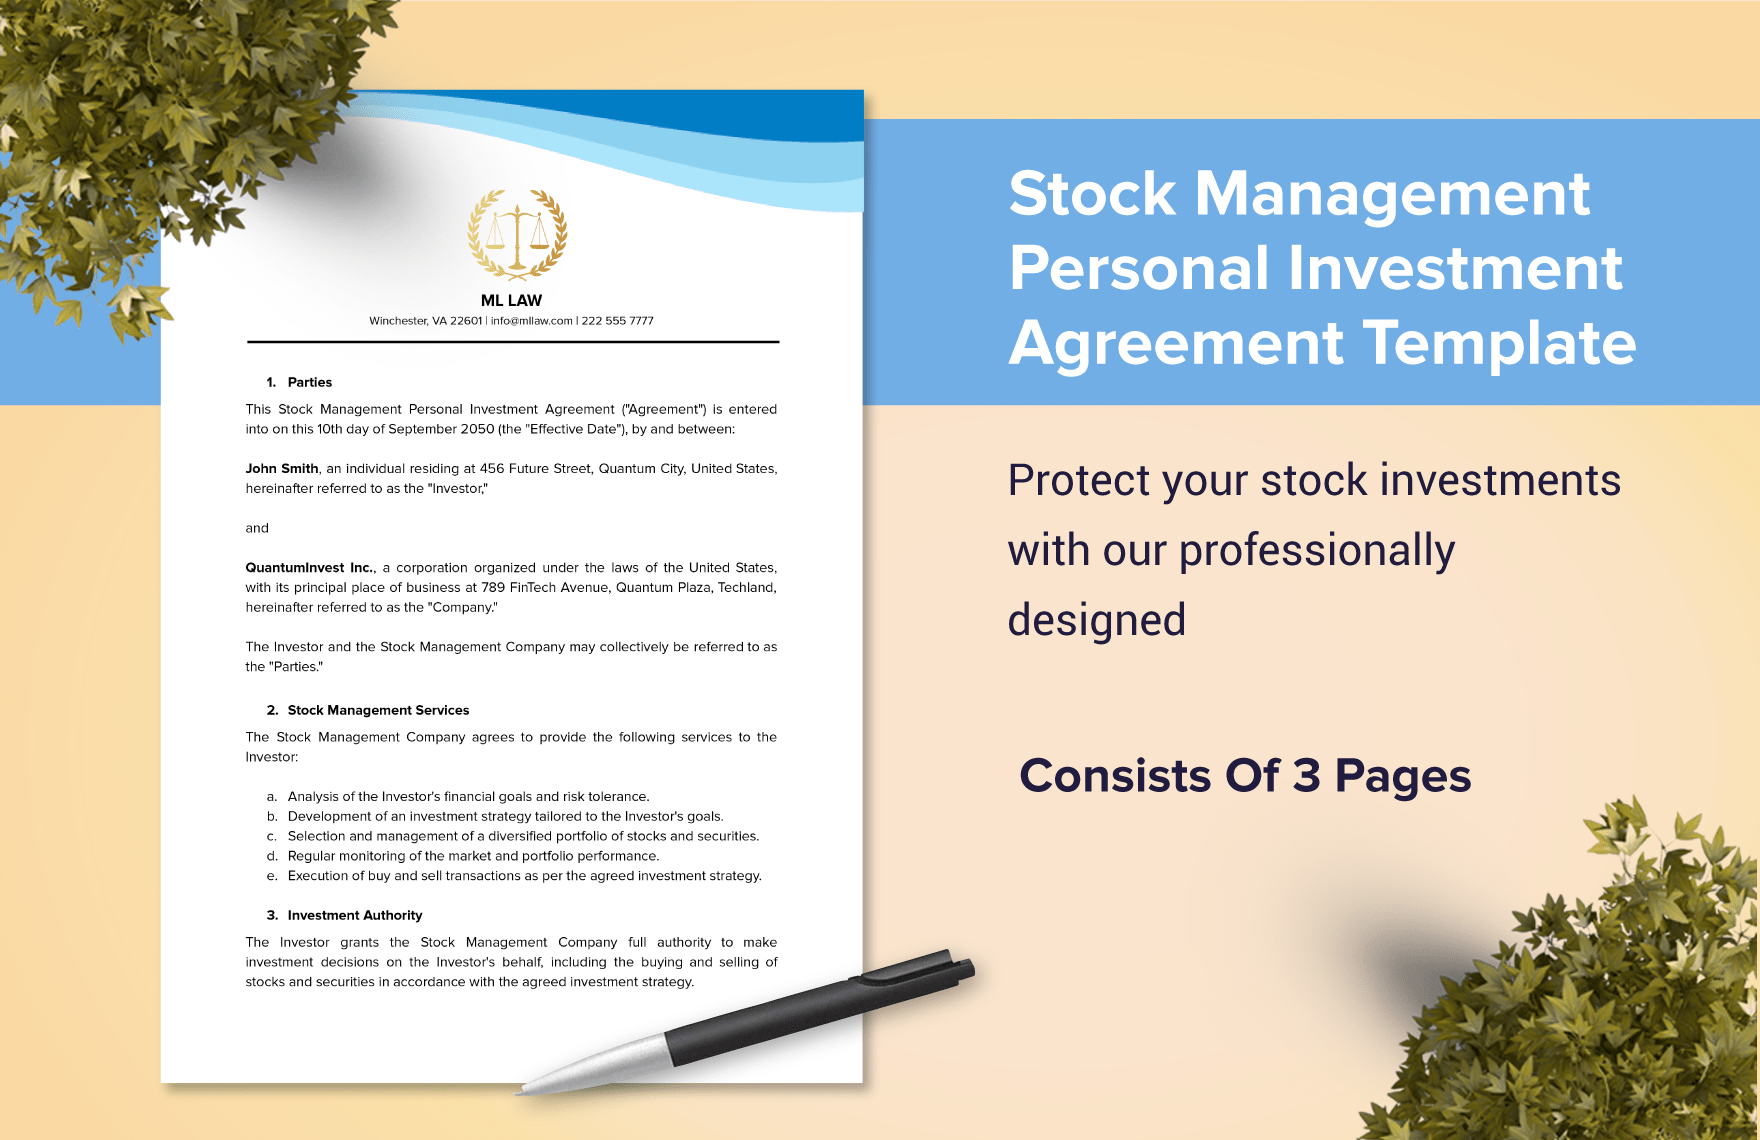 Stock Management Personal Investment Agreement Template